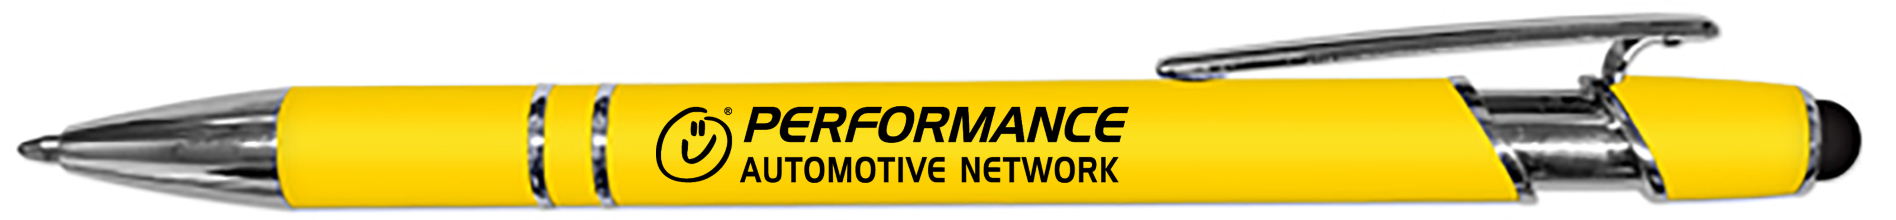 Performance Automotive Network - iWriter Exec Stylus & Soft Touch Rubberized Metal Ball Point Pen - ldfuo-mjgxw